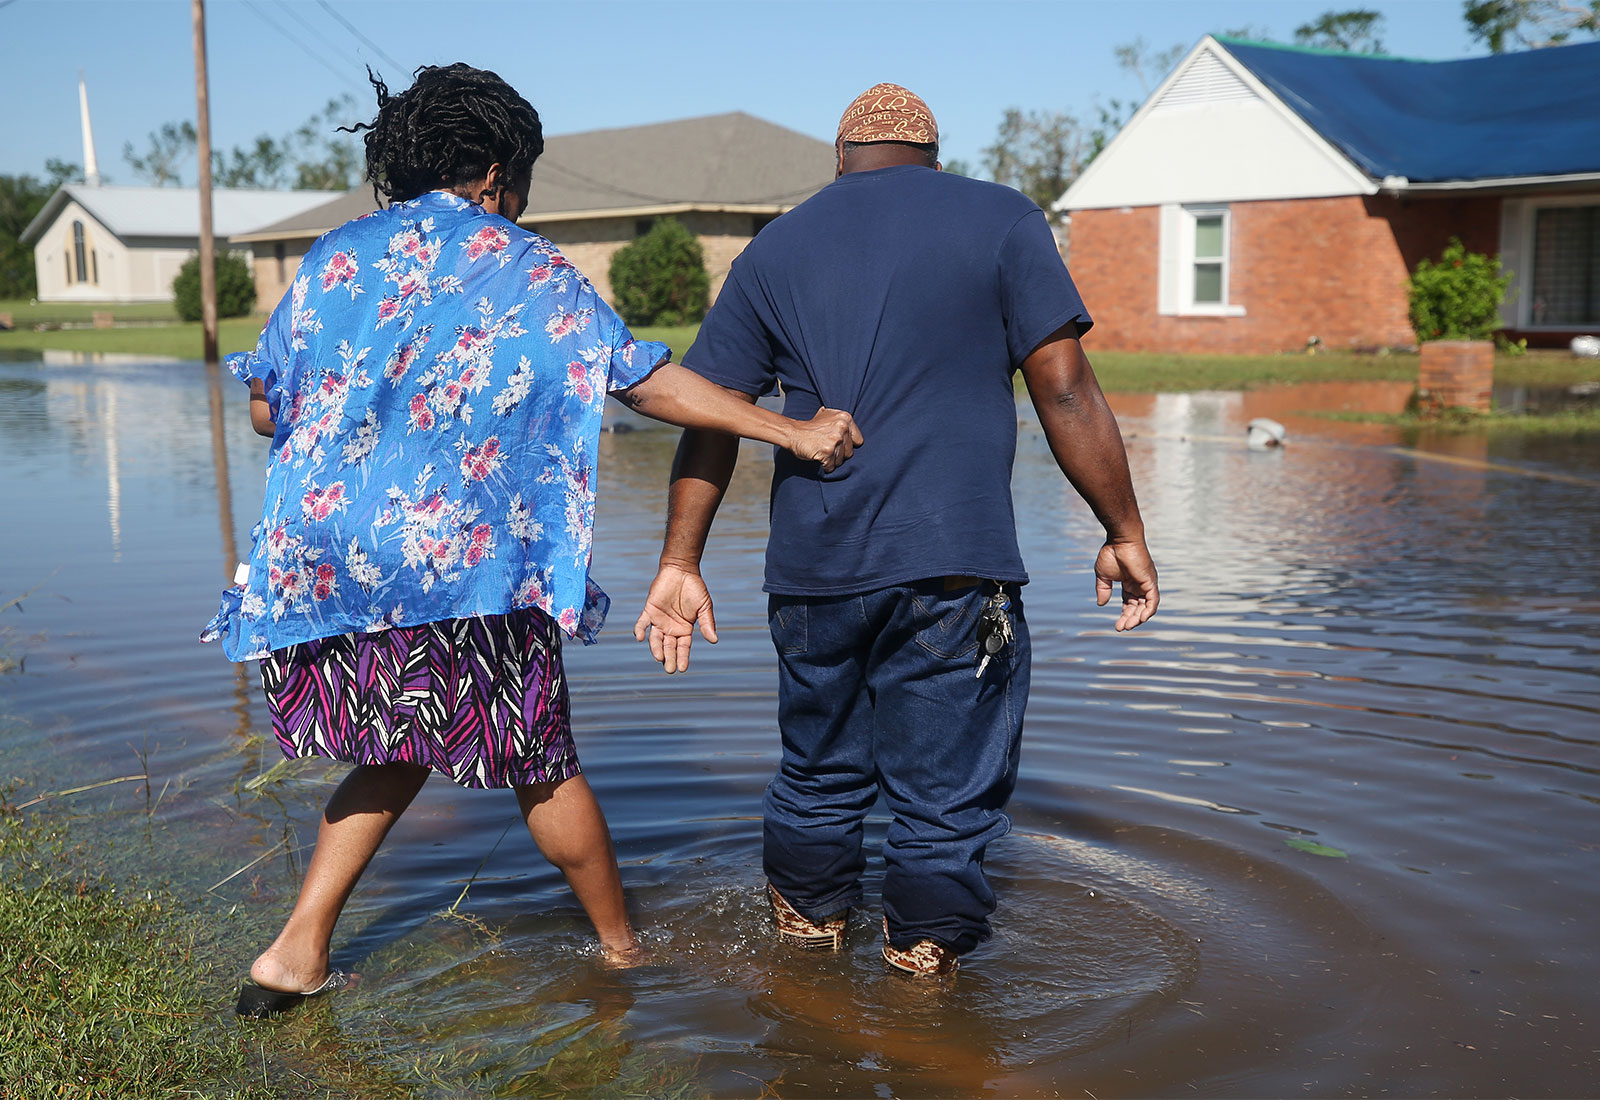 A woman (left) wearing a colorful floral outfit holds onto the back of a man's (right) shirt as they step into a flooded street towards a white and red brick home with a blue tarp on the roof